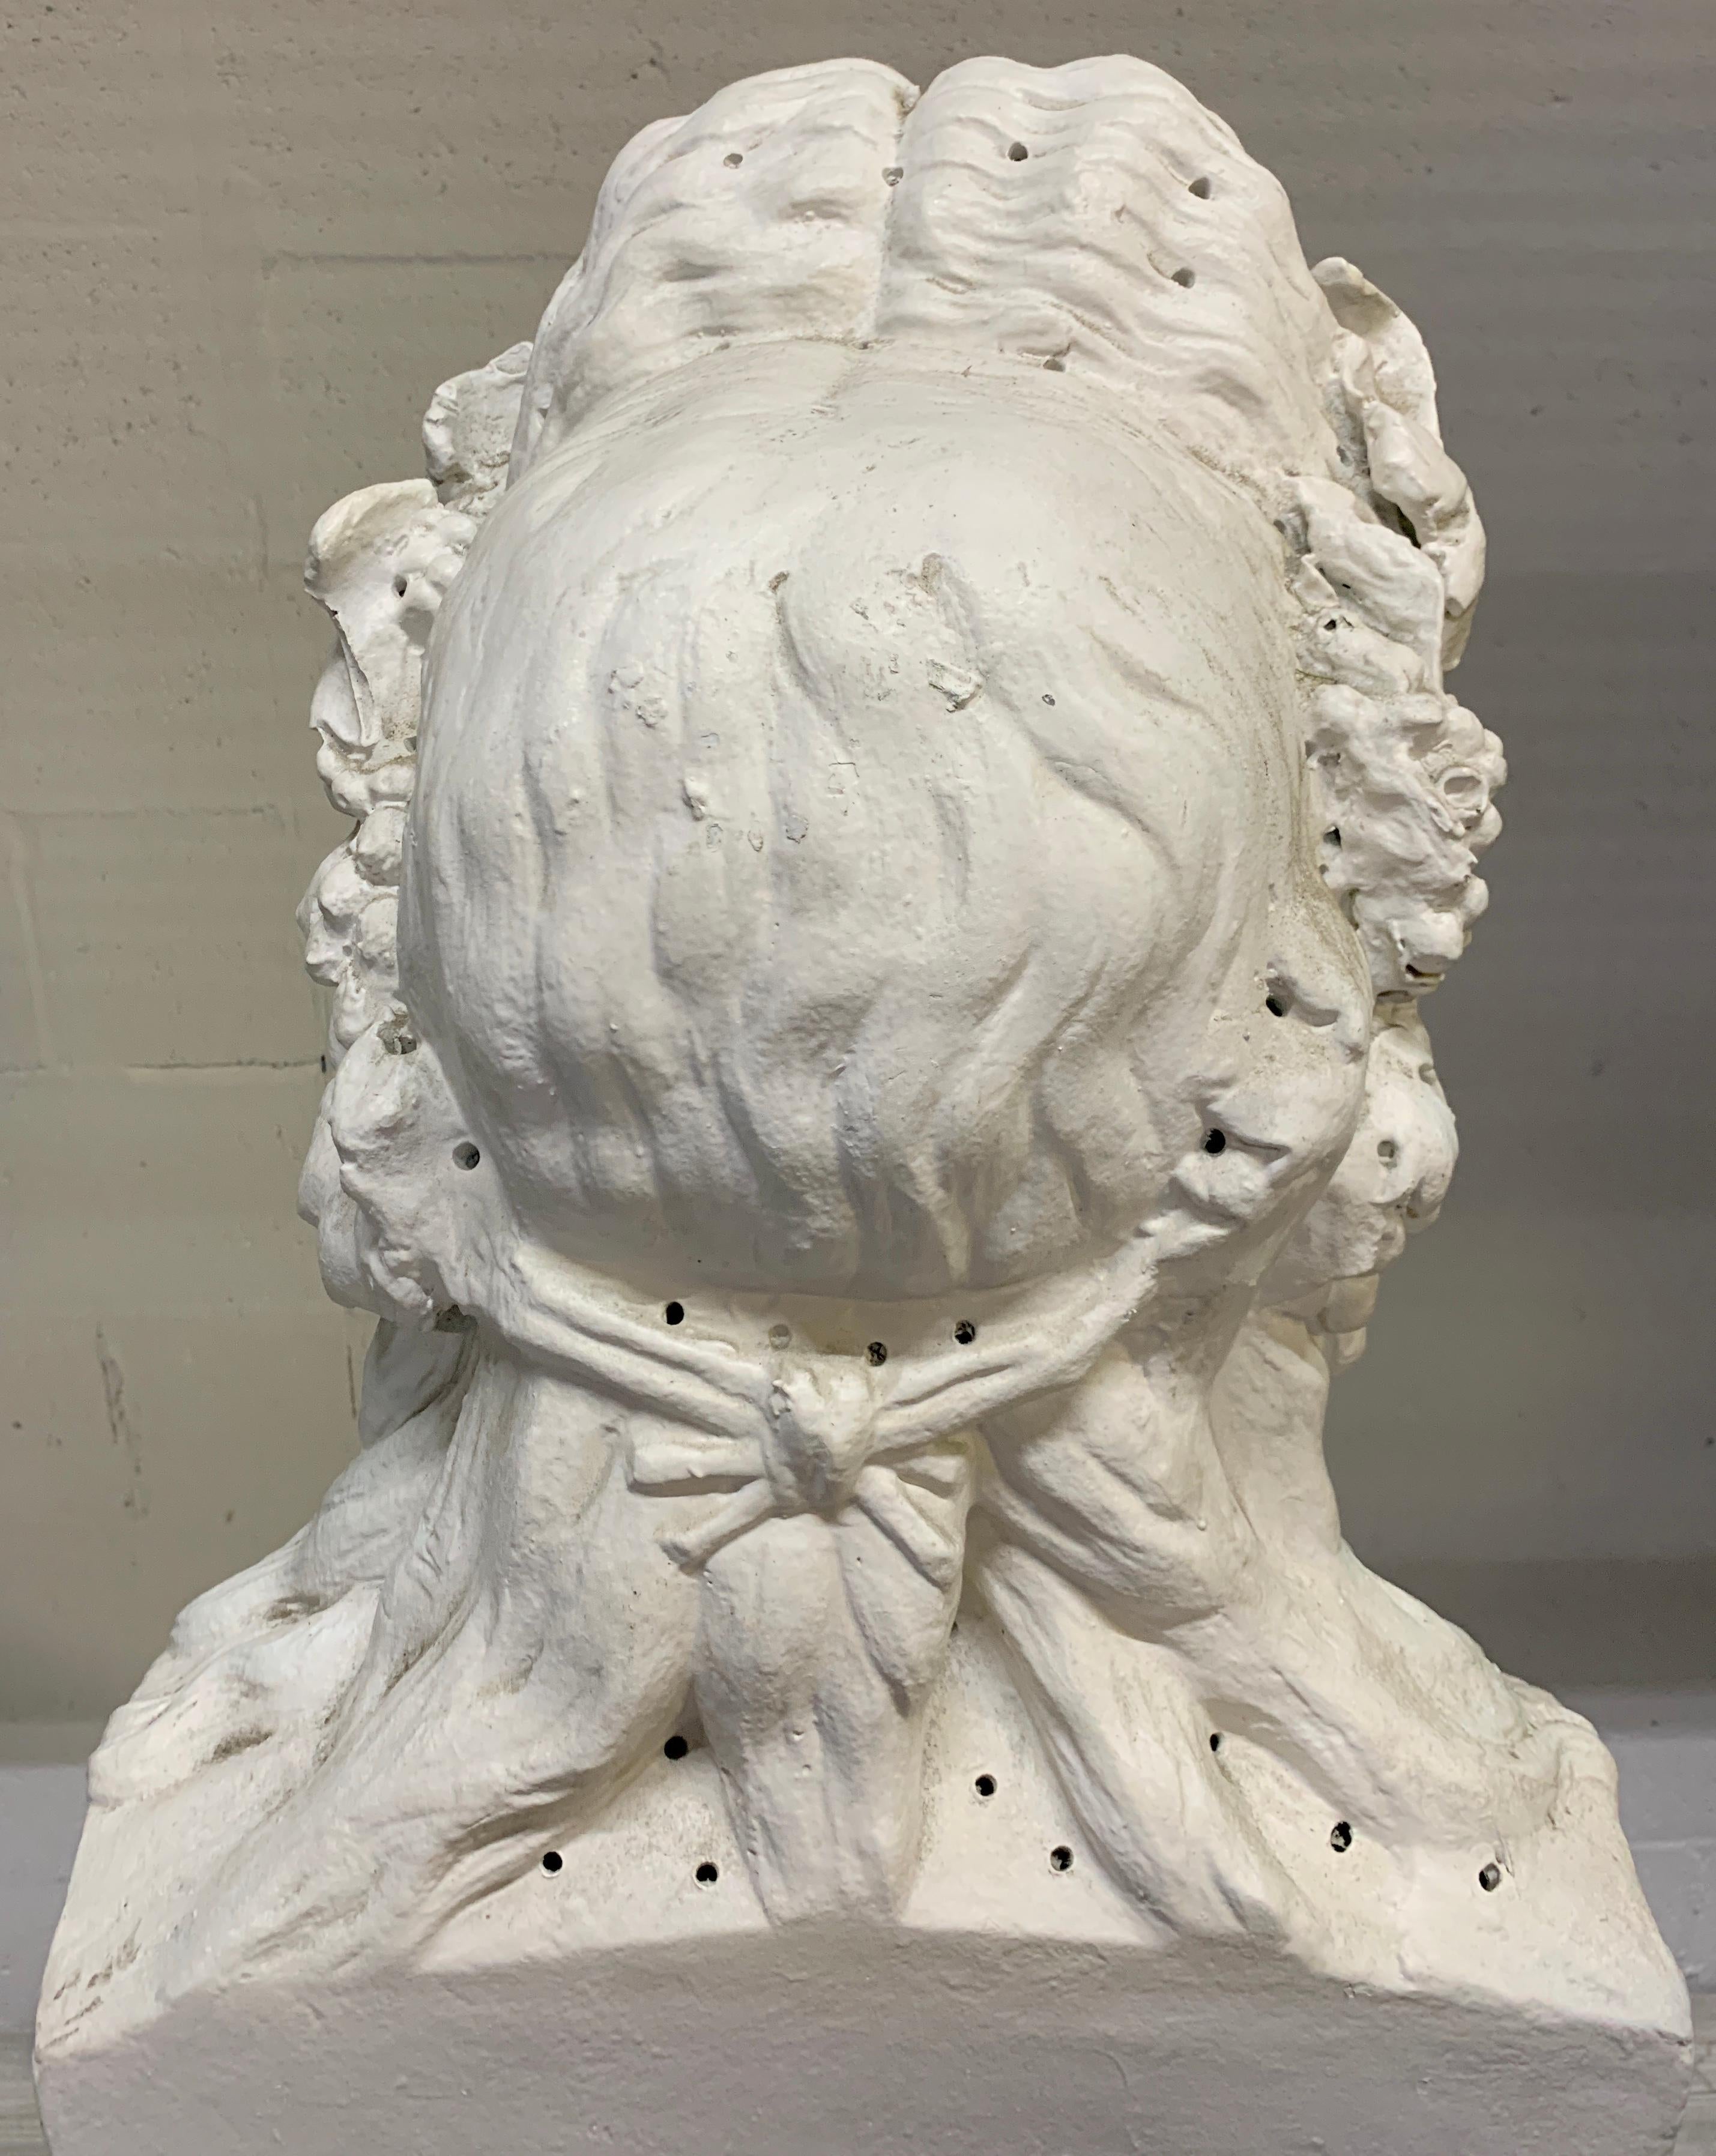 Composition Roman Bust / Herm 'Personification of Comedy' after the Antique